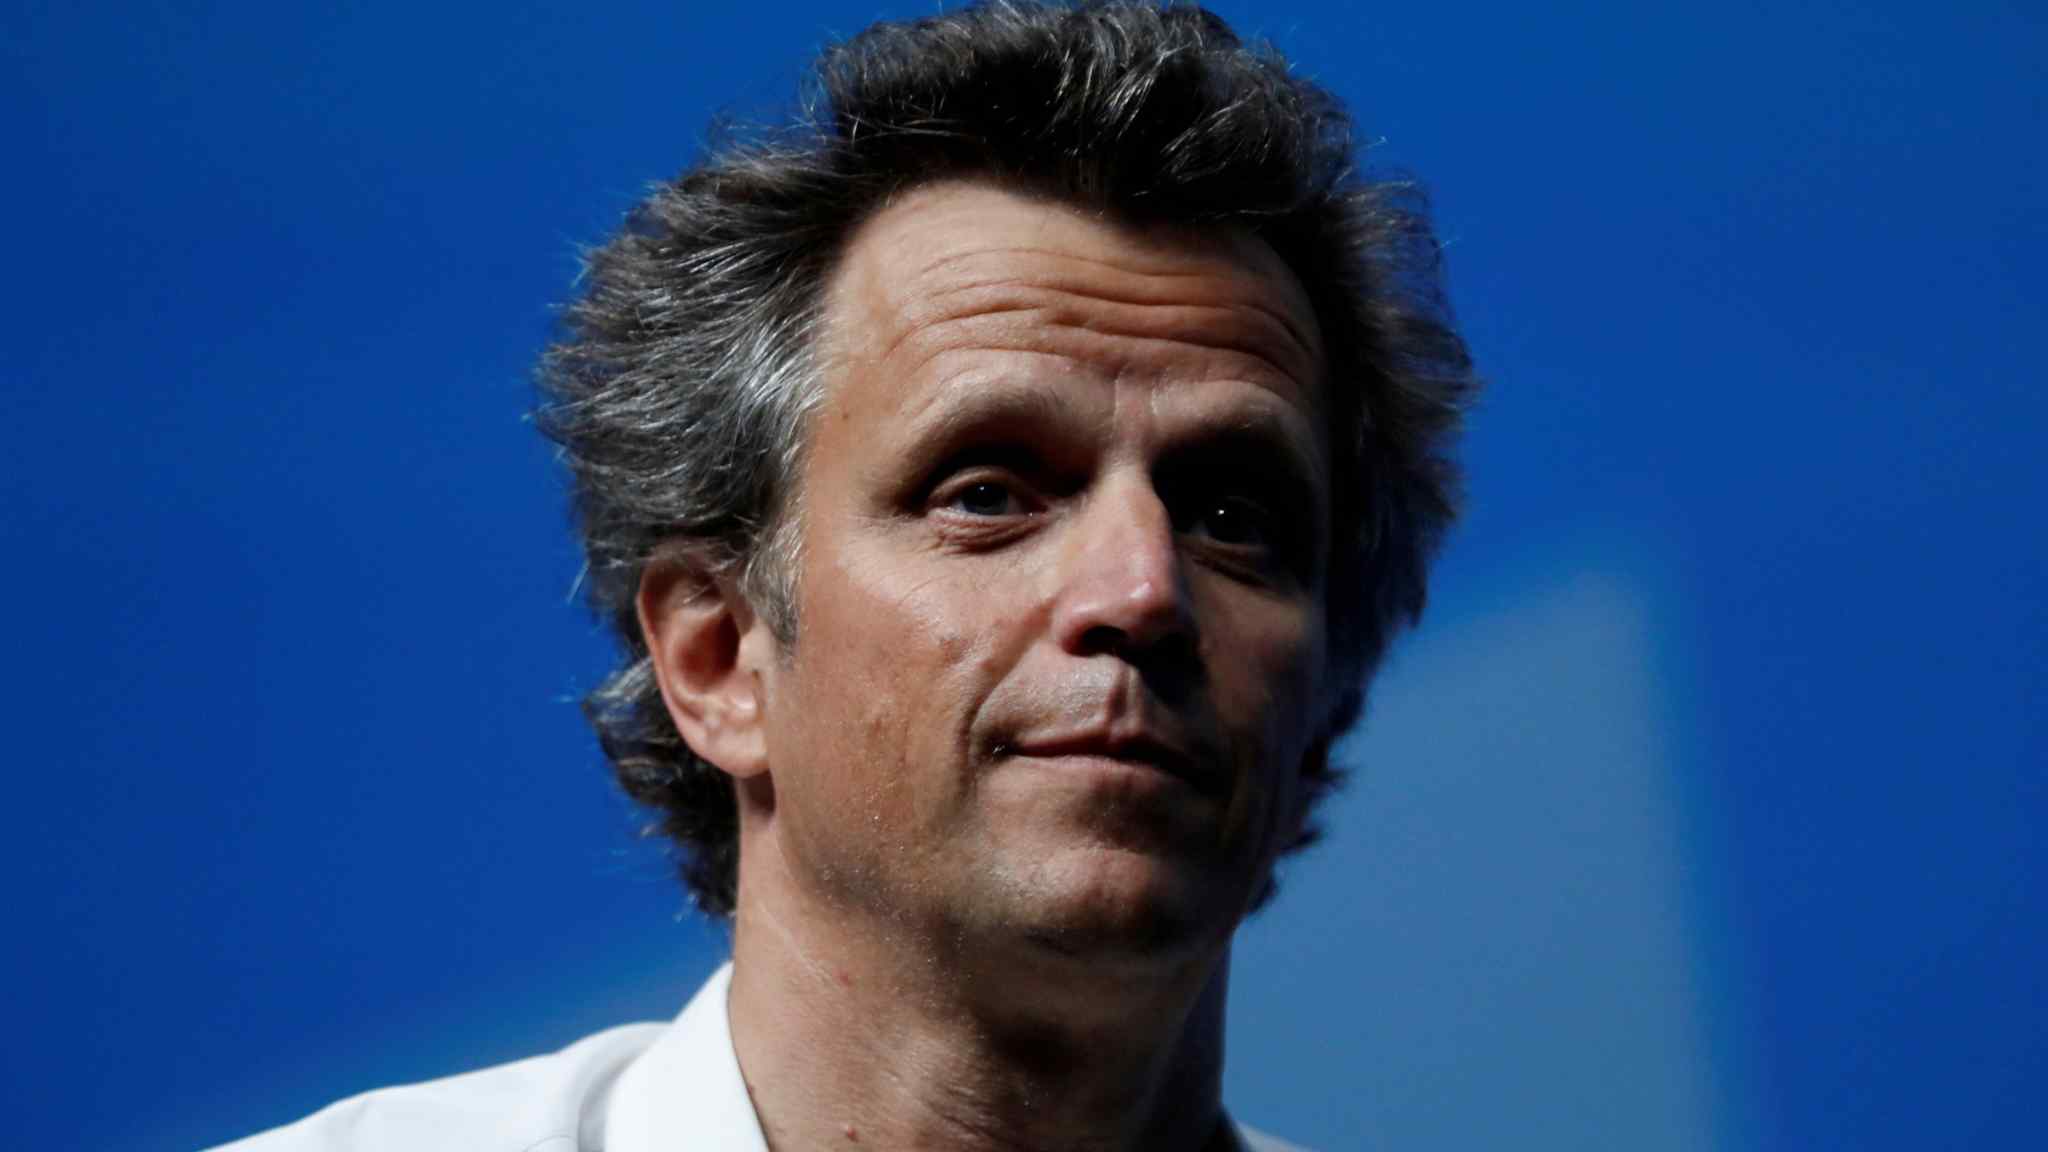 Publicis forecasts revenue growth despite gloomy outlook